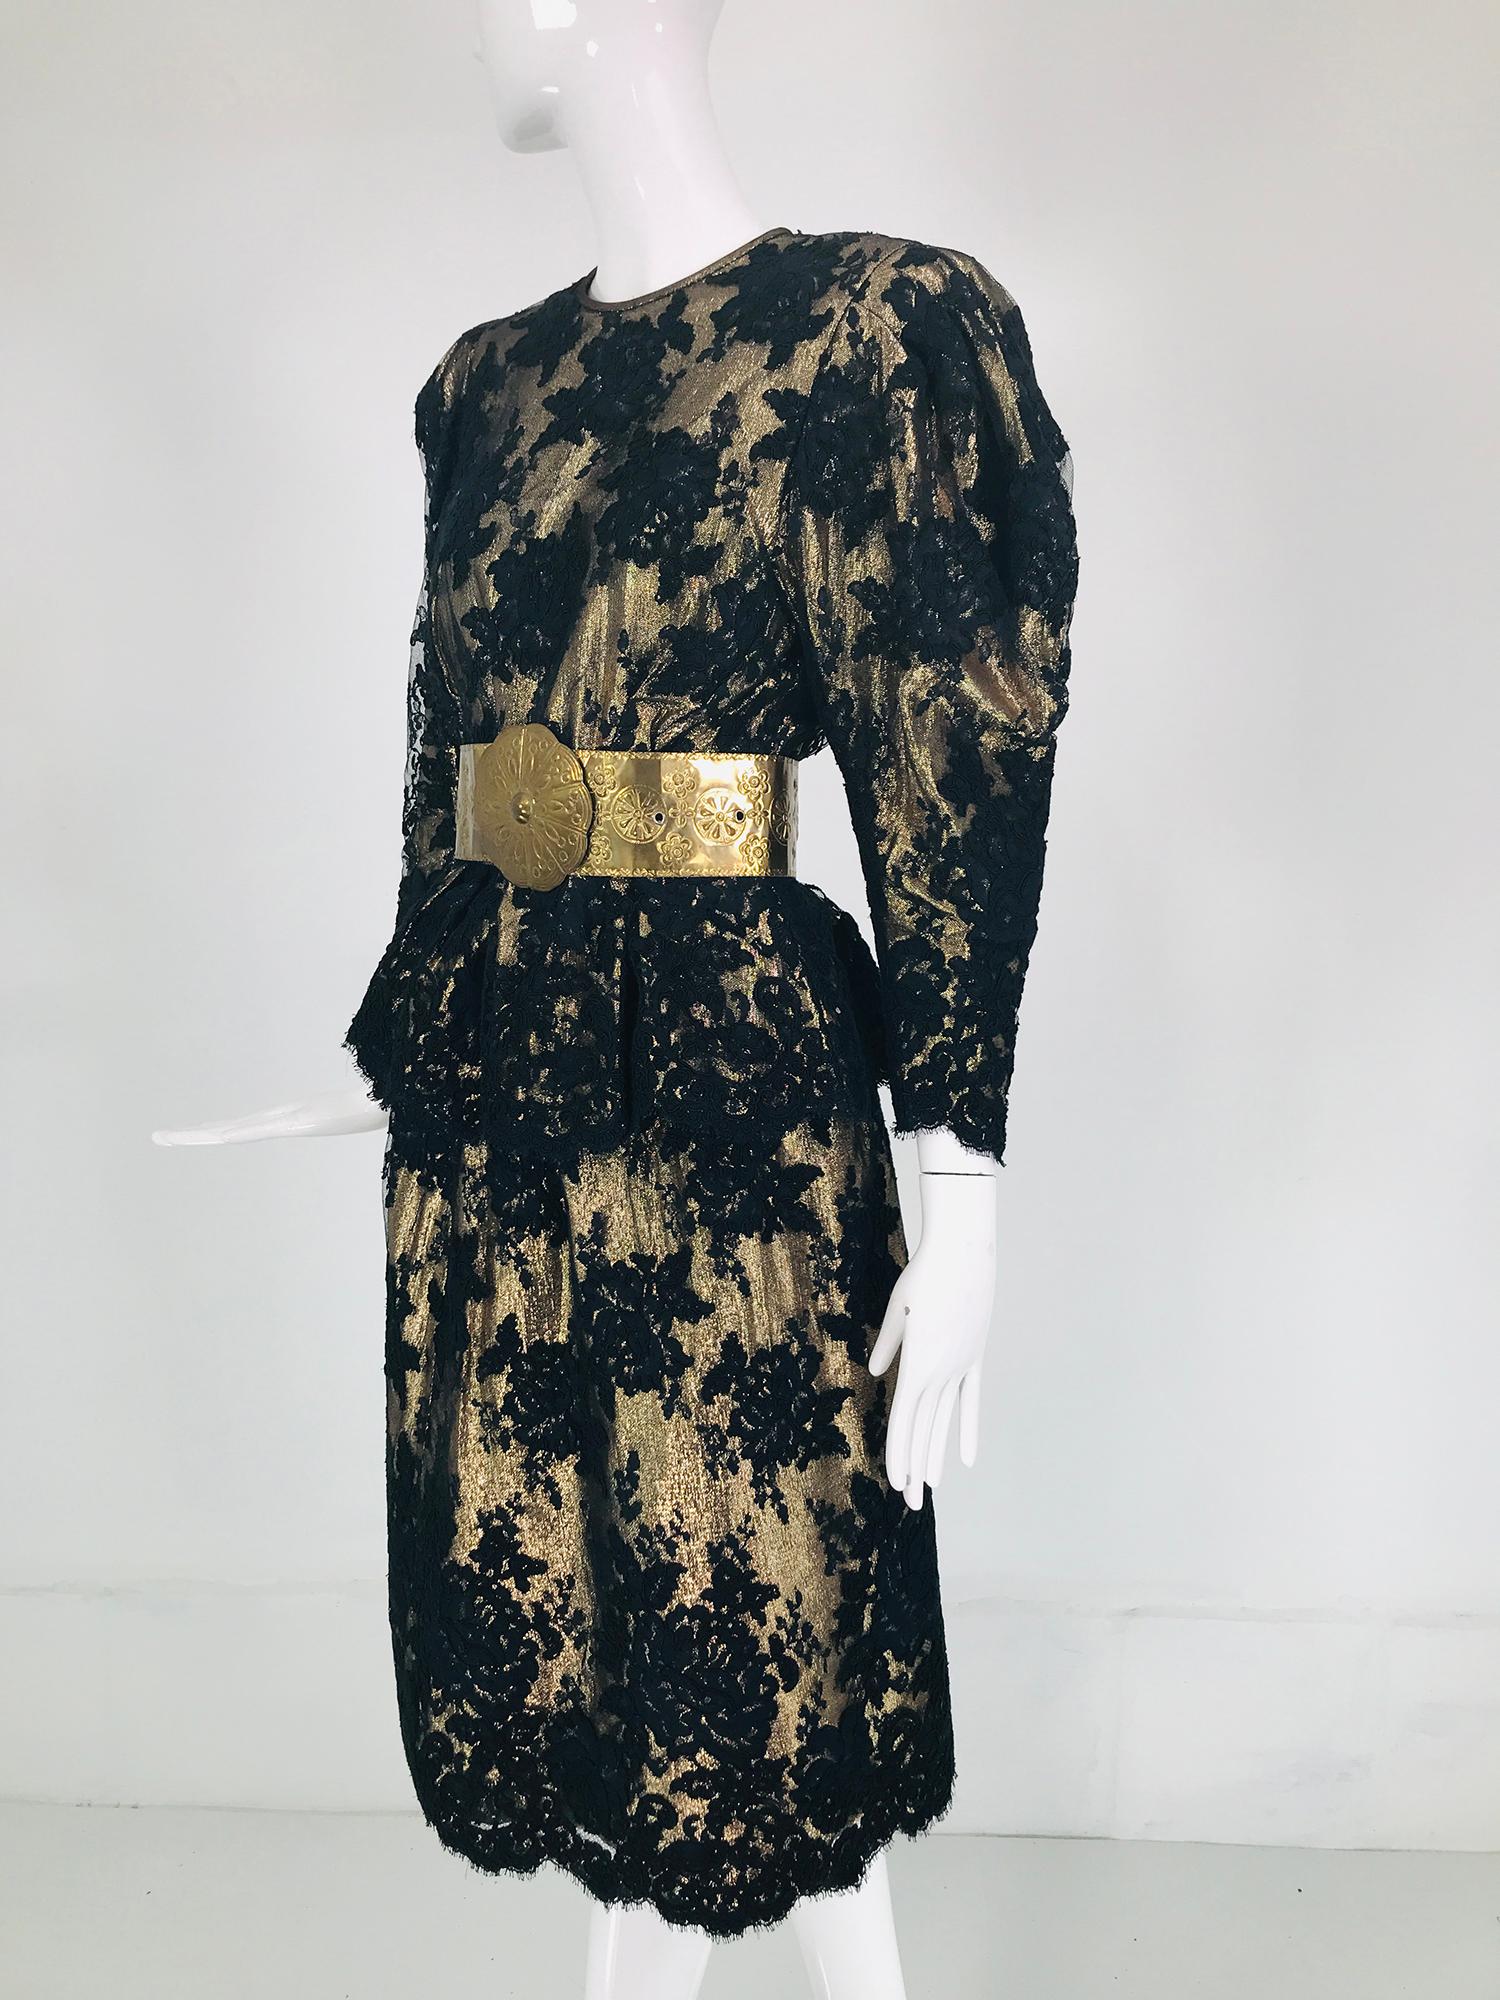 Pauline Trigere Black Guipure Lace over Gold Lame 1980s 2pc Skirt Set  For Sale 5